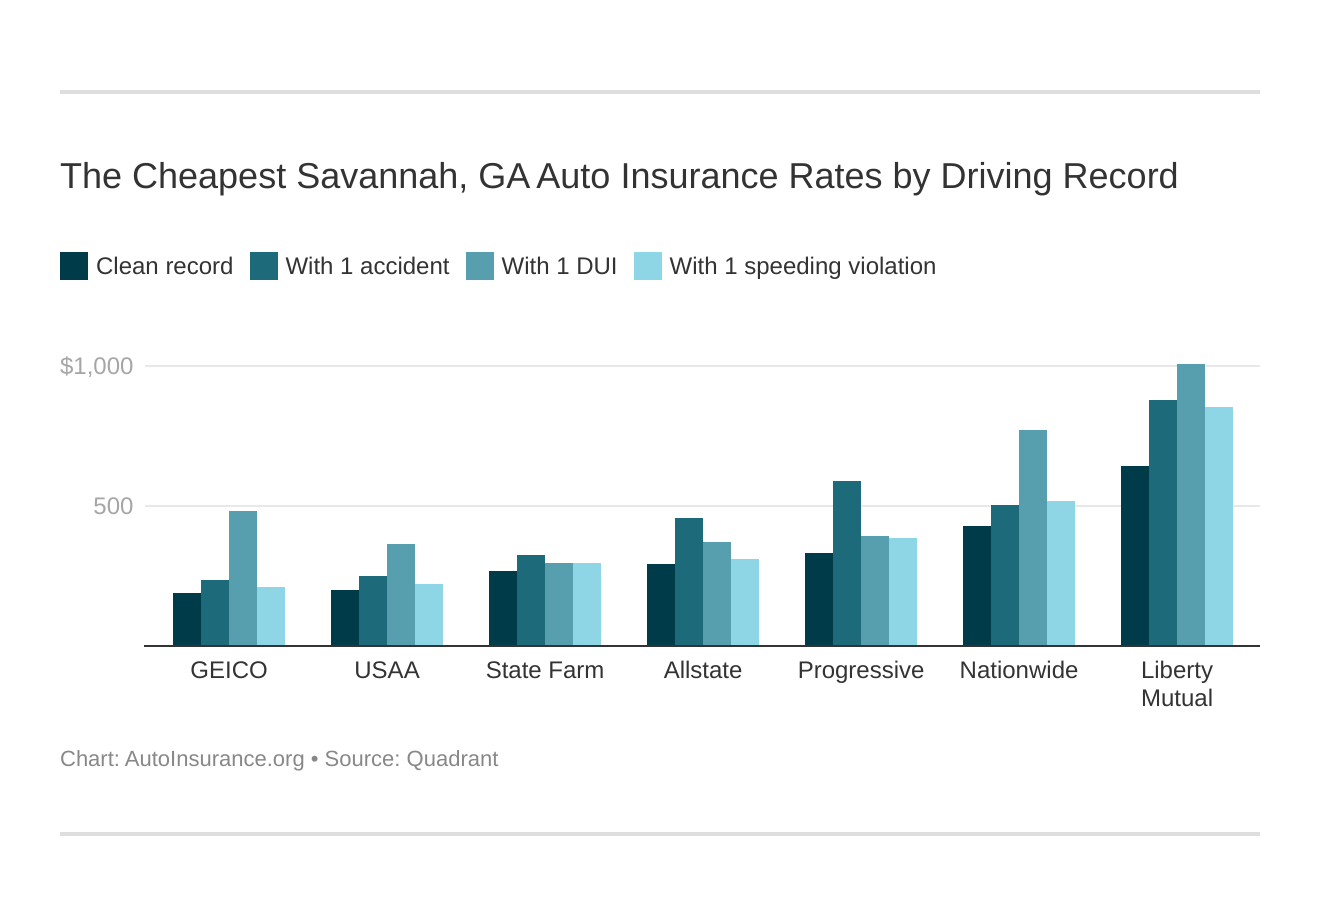 The Cheapest Savannah, GA Auto Insurance Rates by Driving Record